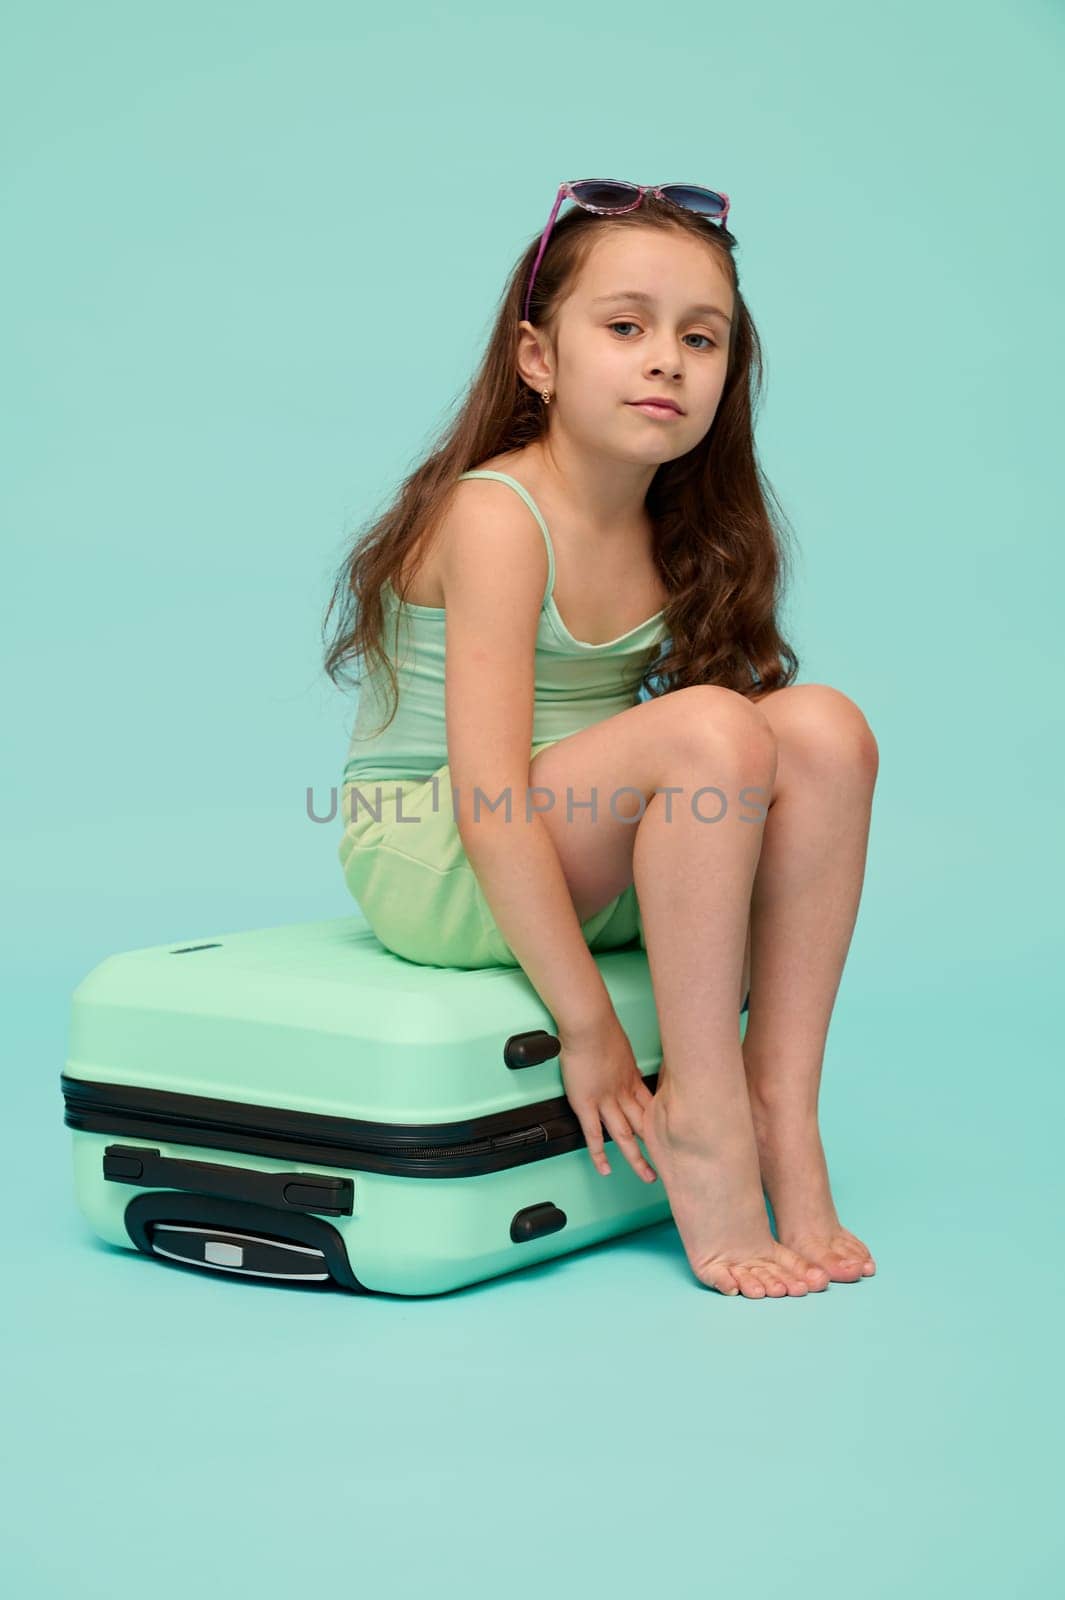 Full length portrait of a little girl in summer wear, sitting on a plastic suitcase, smiling cutely looking at camera by artgf